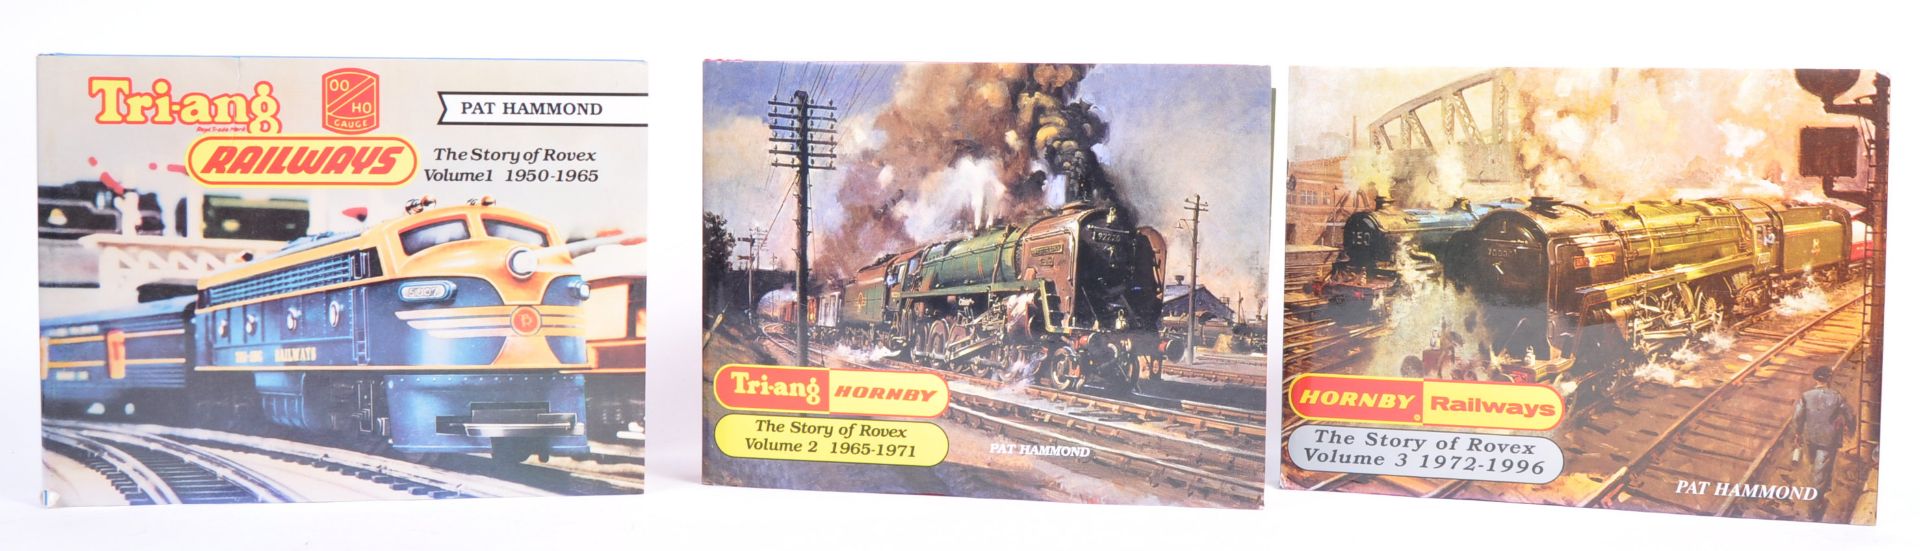 TRI-ANG RAILWAYS - THE STORY OF ROVEX VOLUMES 1-3